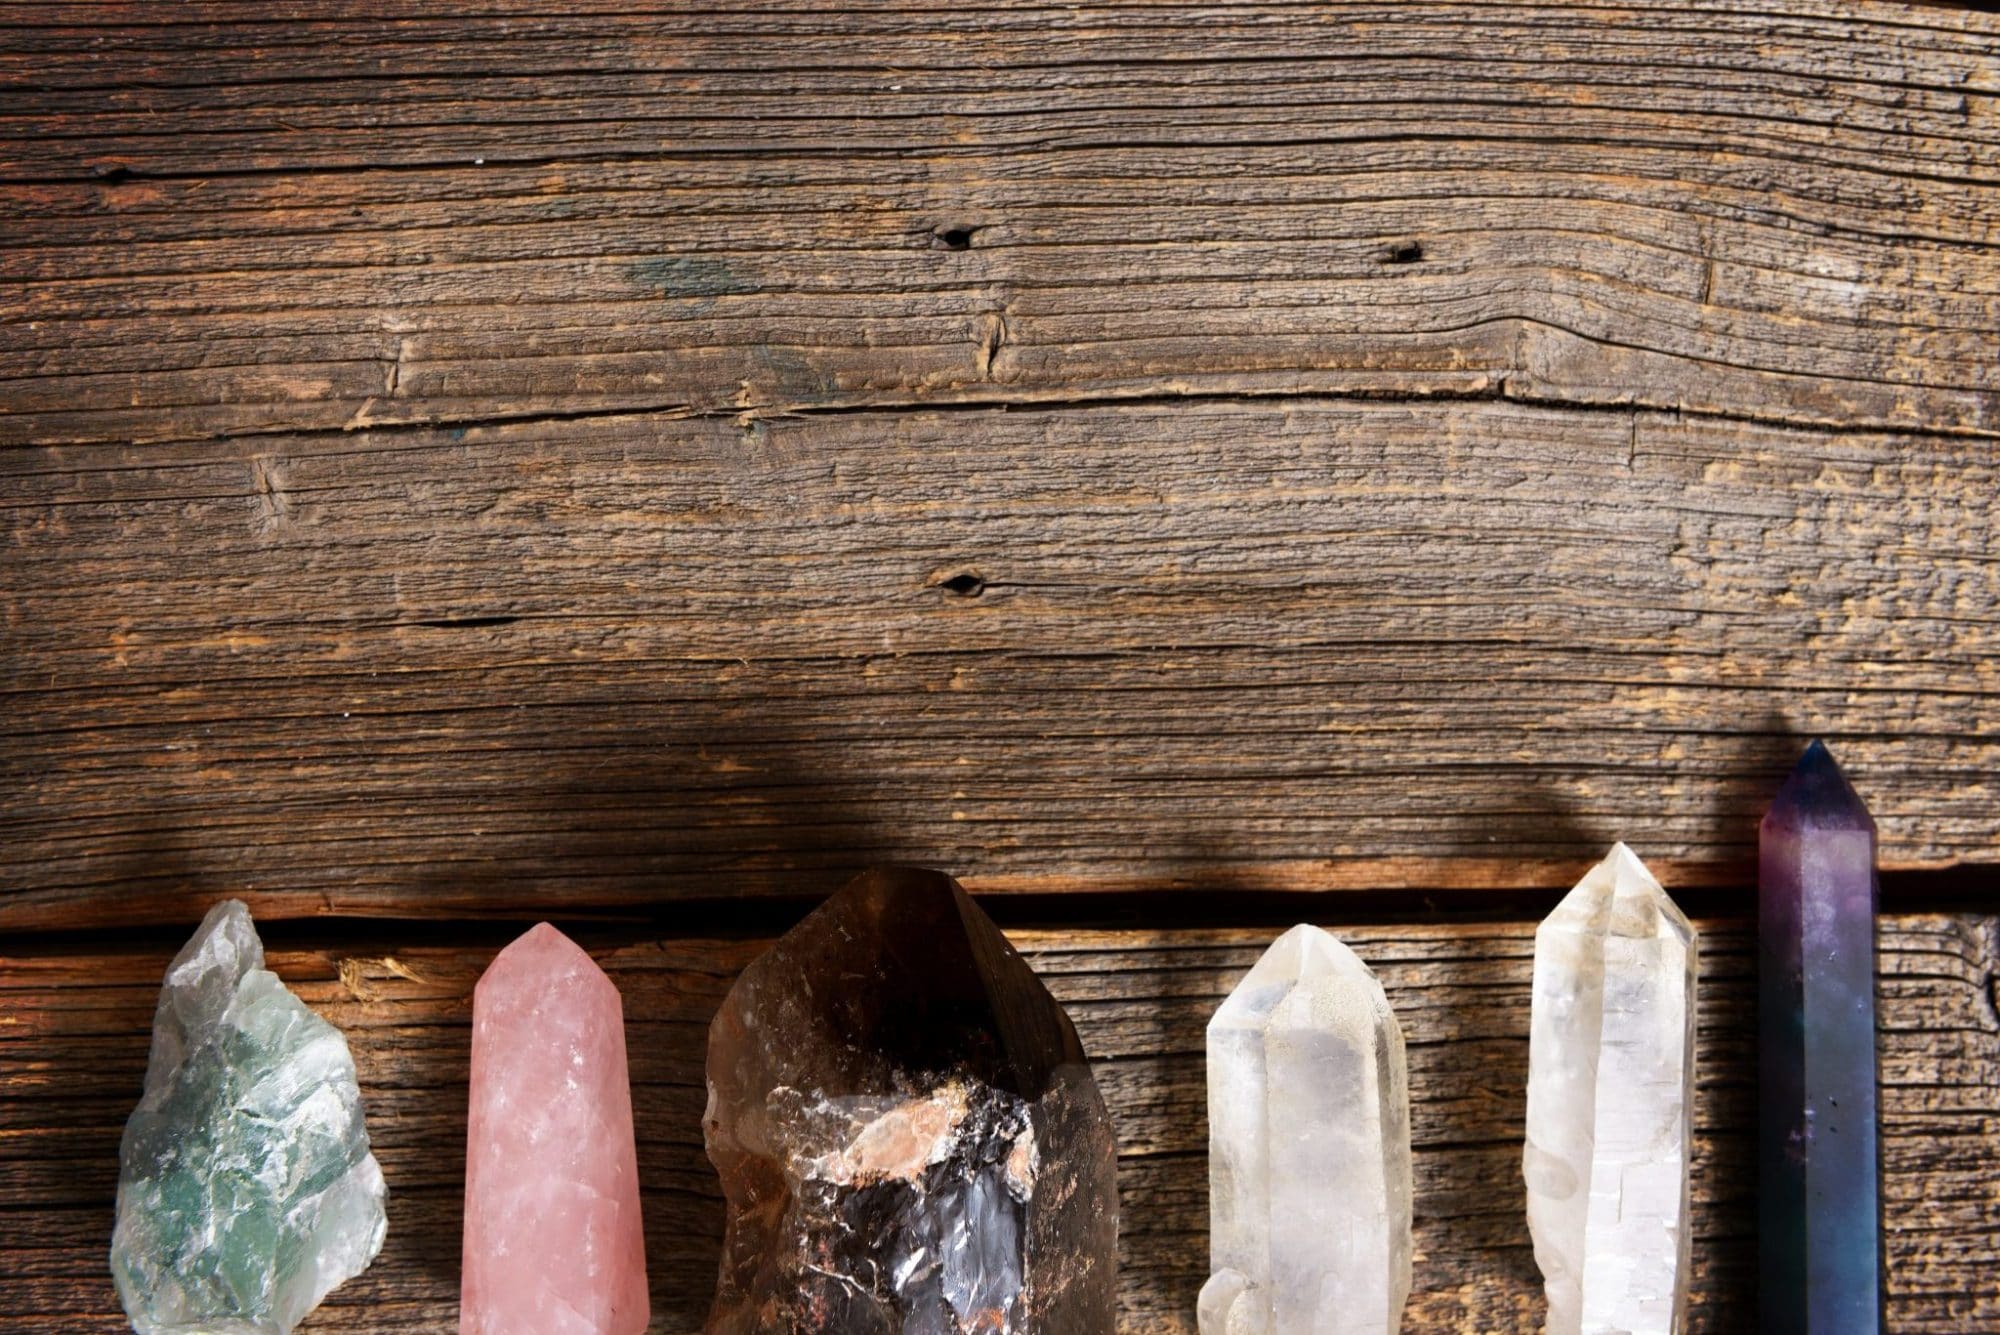 Healing Crystals: The Perfect Guide to Healing Your Heart, Mind, Body, and  Soul with the Power of Crystals